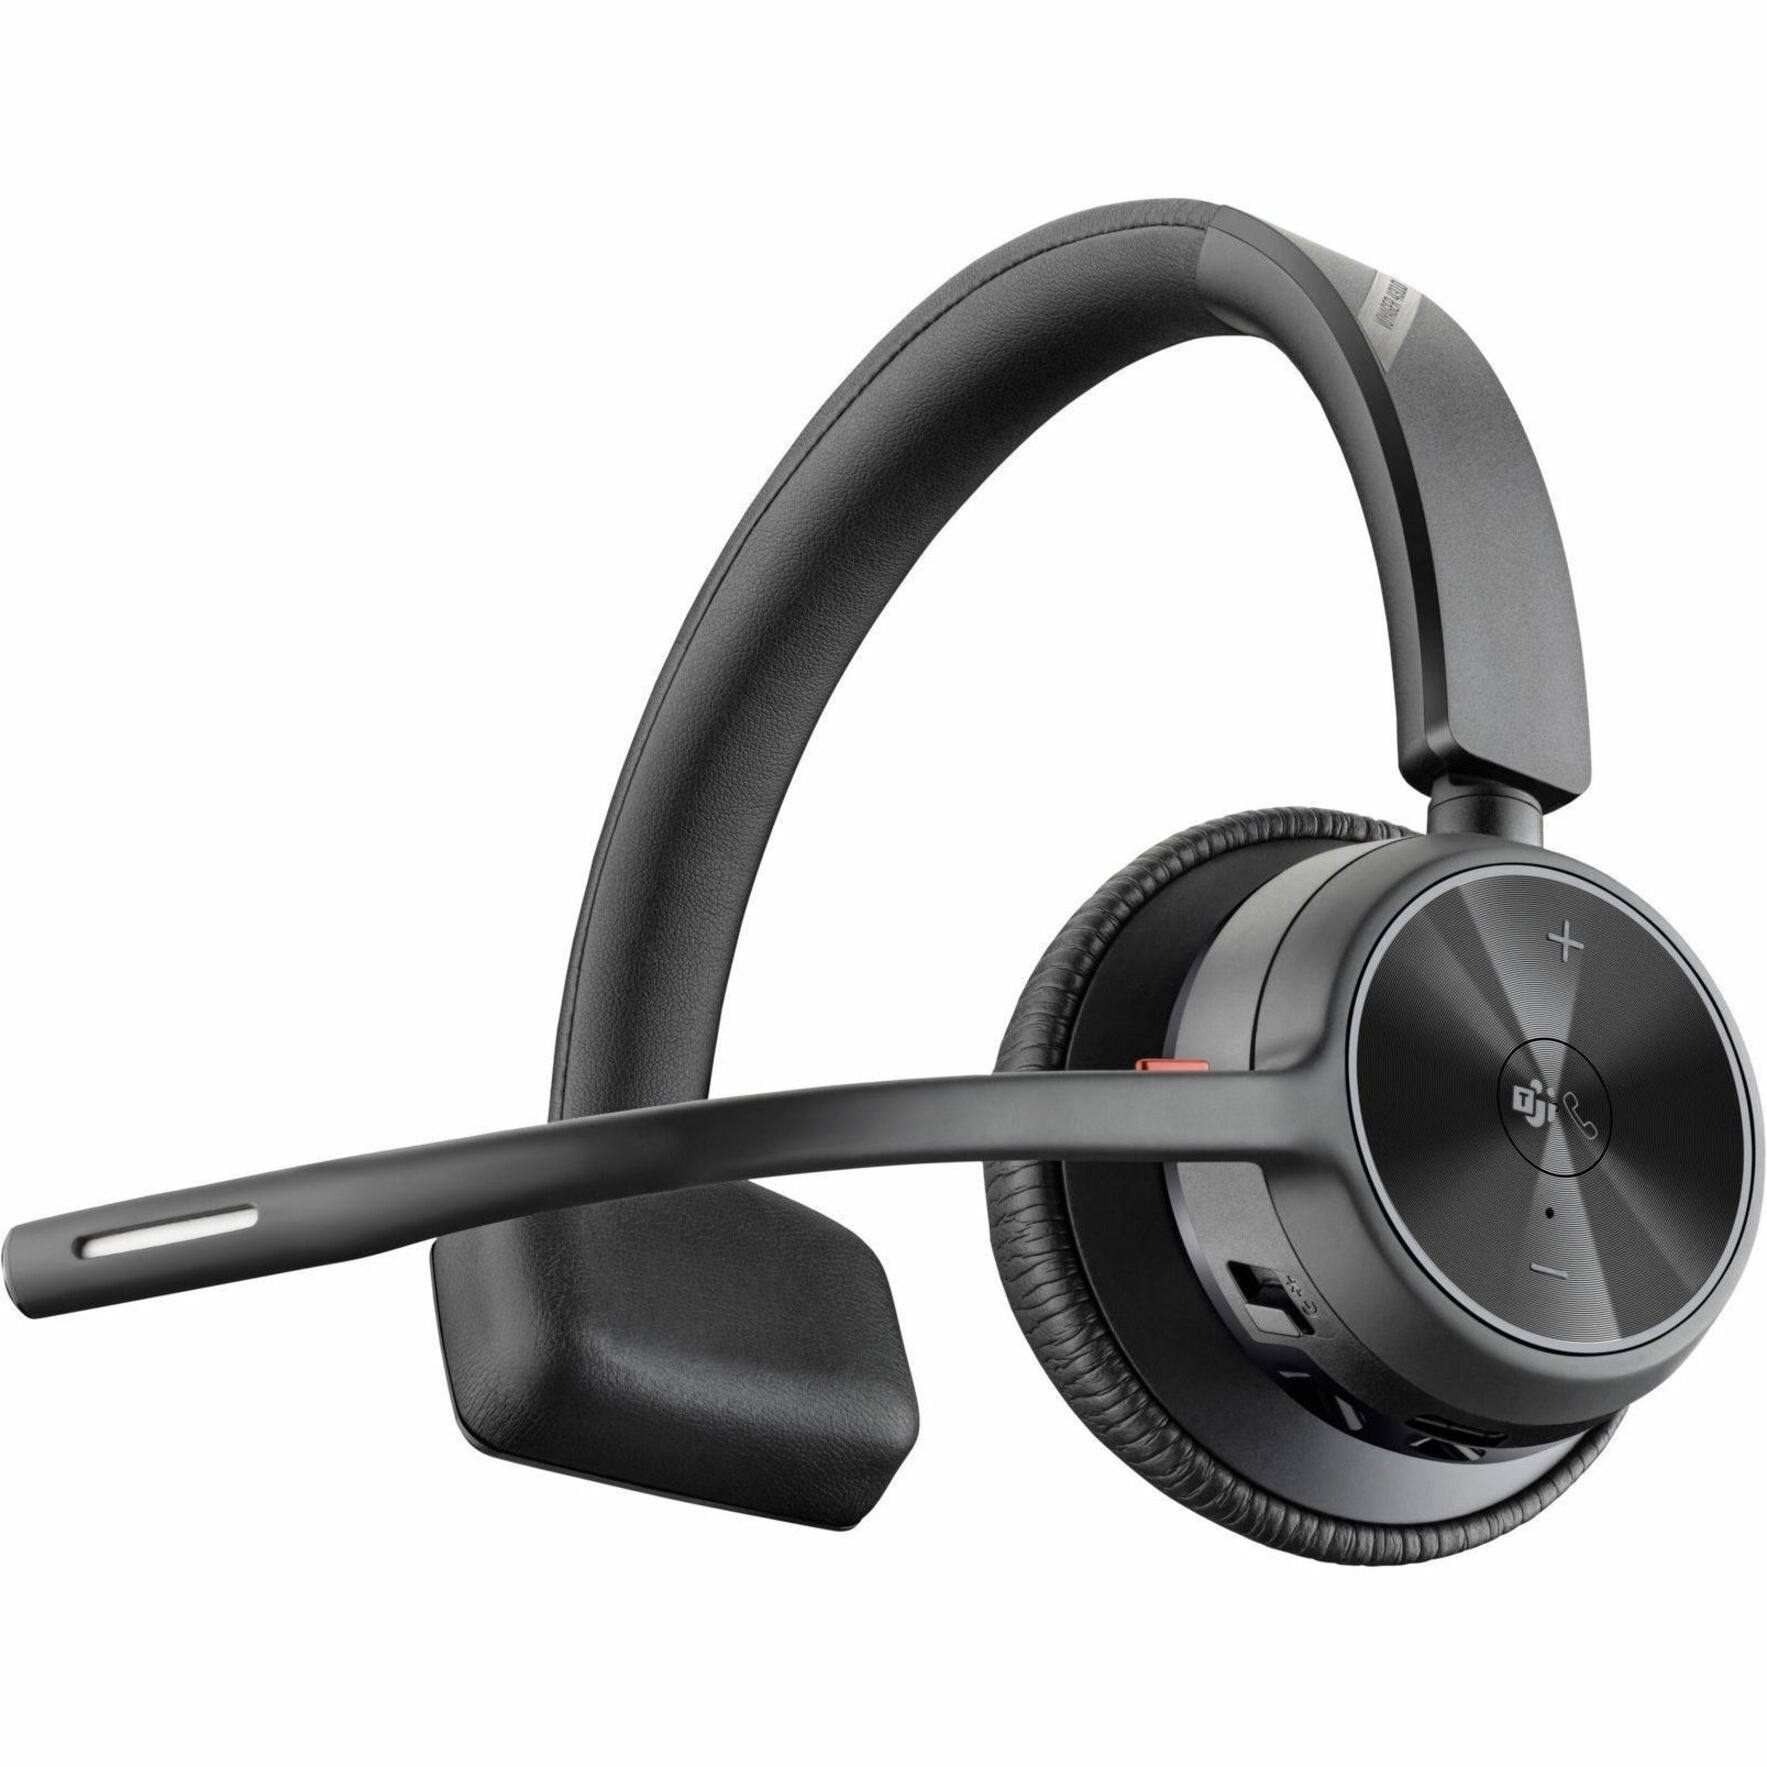 Poly 77Y95AA Voyager 4310 UC V4310-M C USB-C Headset +BT700 dongle, Microsoft Teams Certified, Wireless Bluetooth 5.1, Noise Cancelling